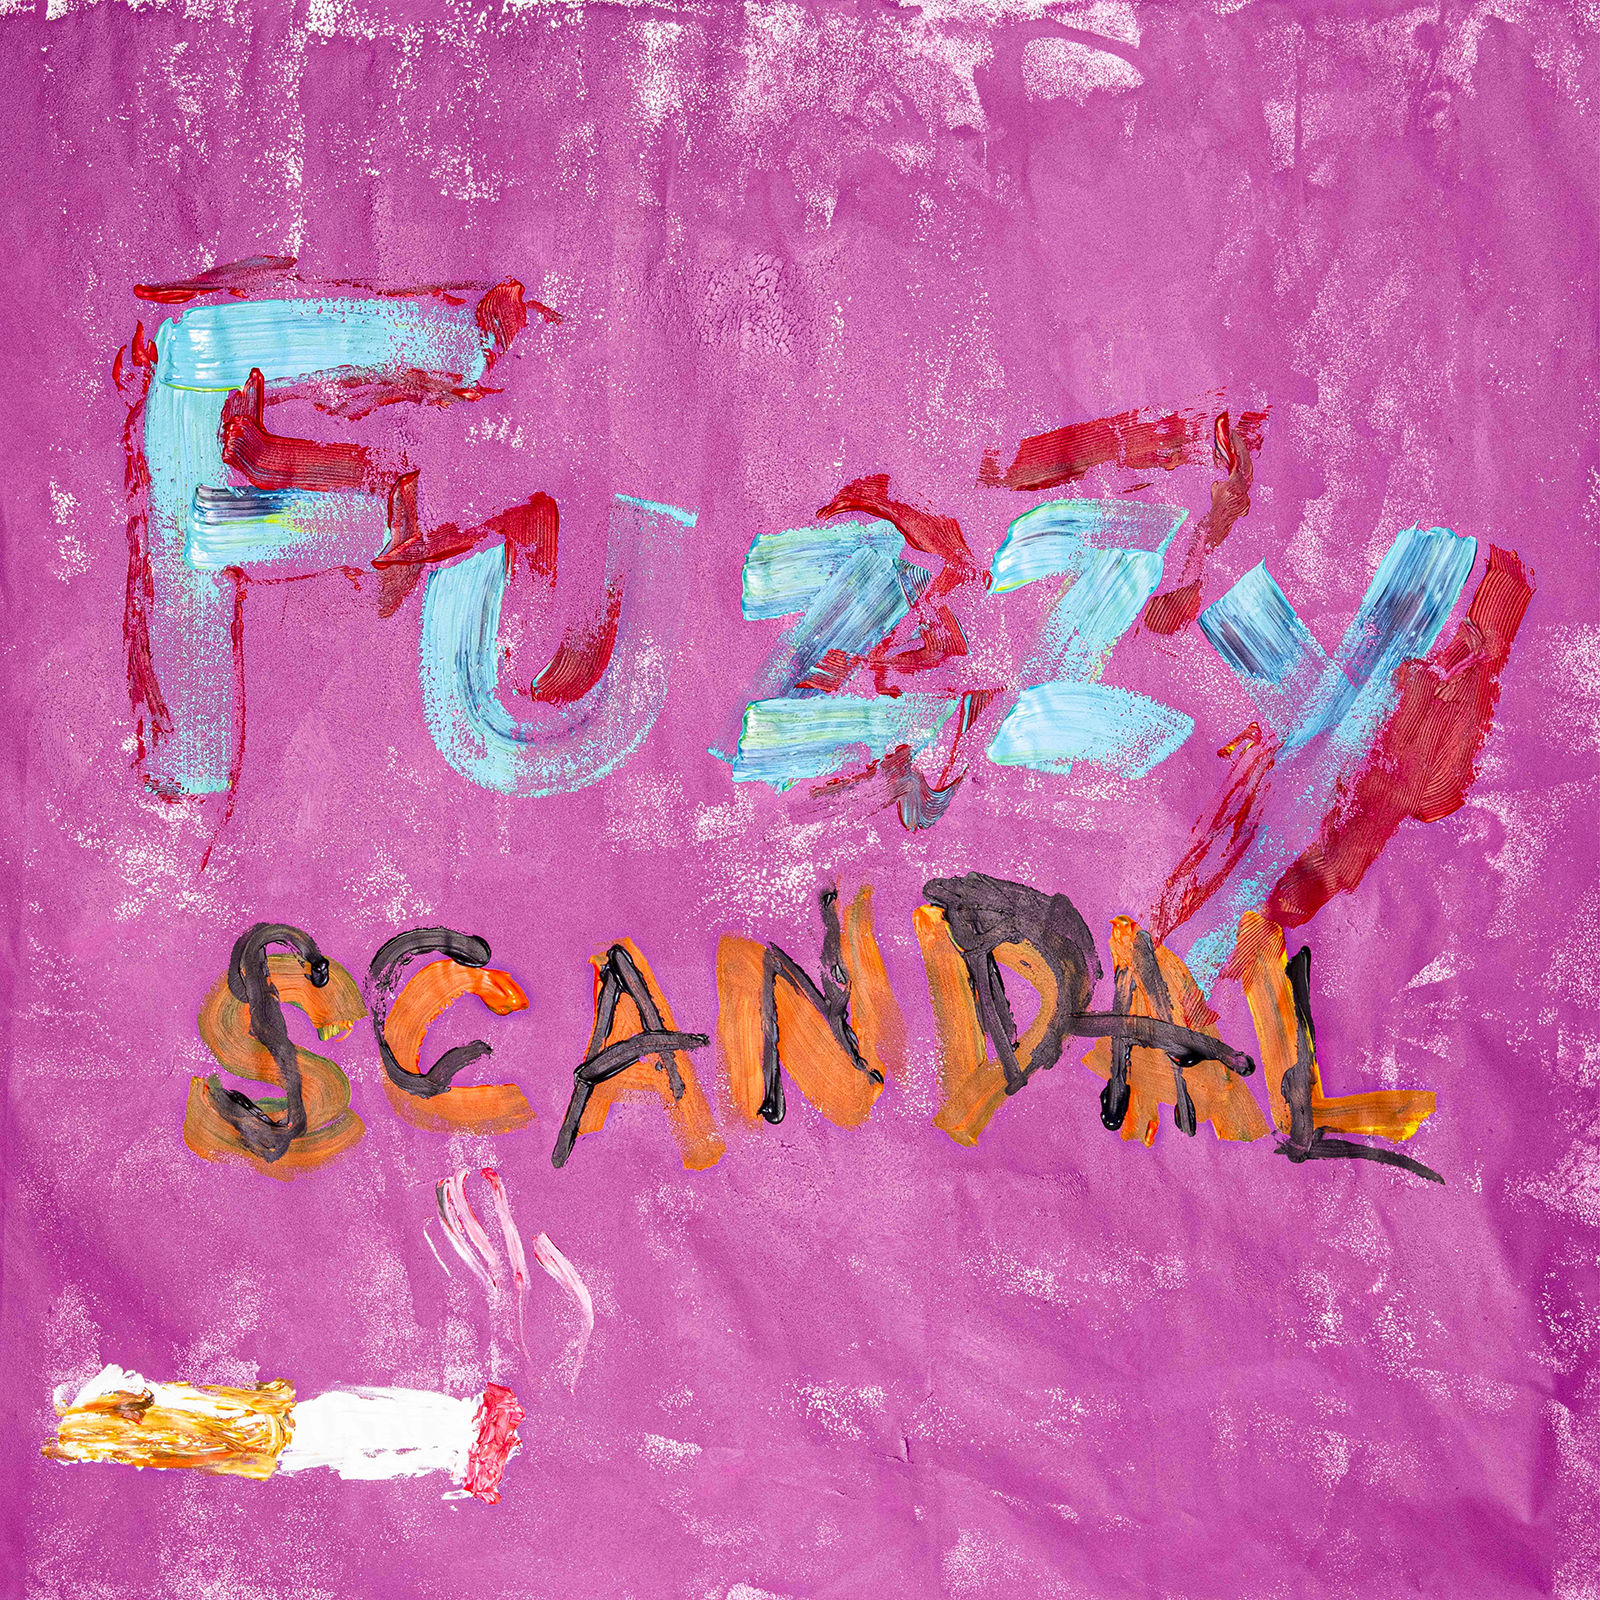 Topics tagged under fuzzy on SCANDAL HEAVEN 5d3fe289b8261-S8580-SCANDAL-Fuzzy-5d3fe289df6a2